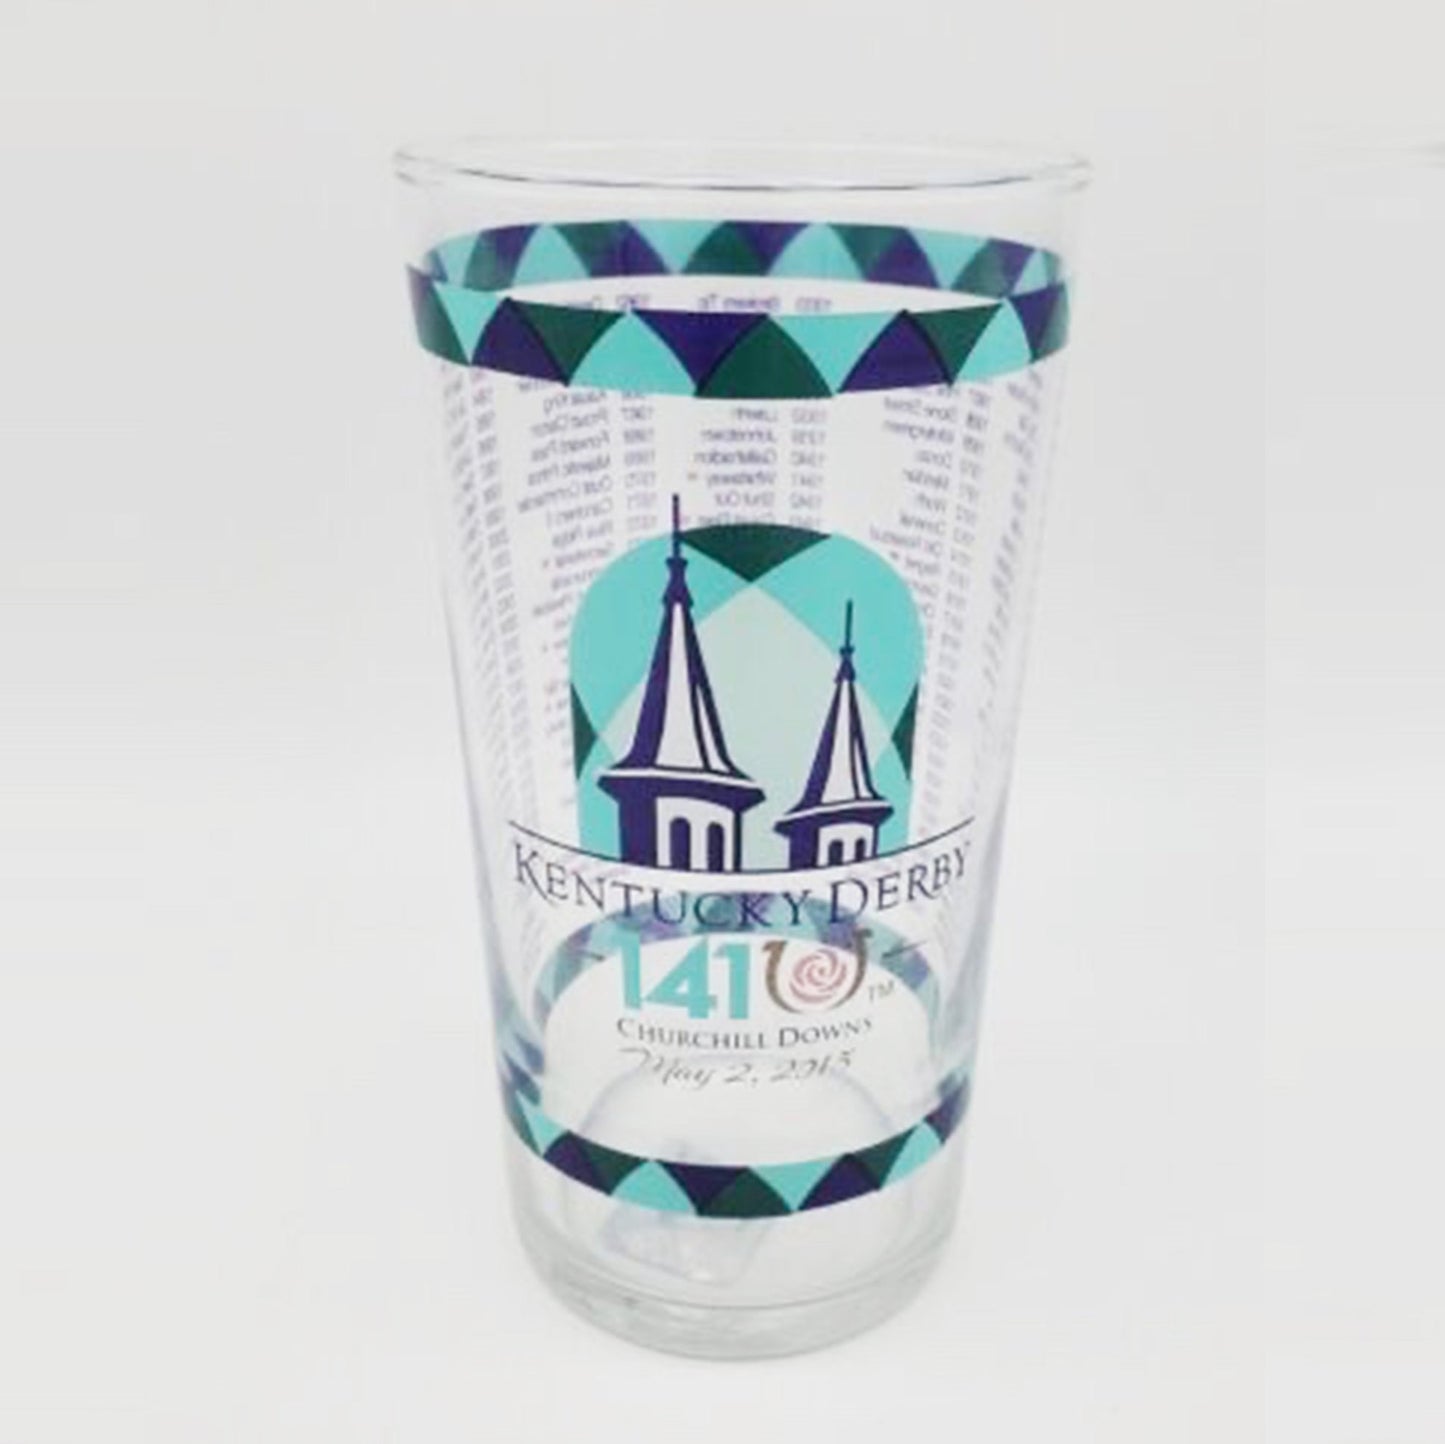 KENTUCKY DERBY Mint Julep Glasses | 2010 - 2019 | Sold Individually